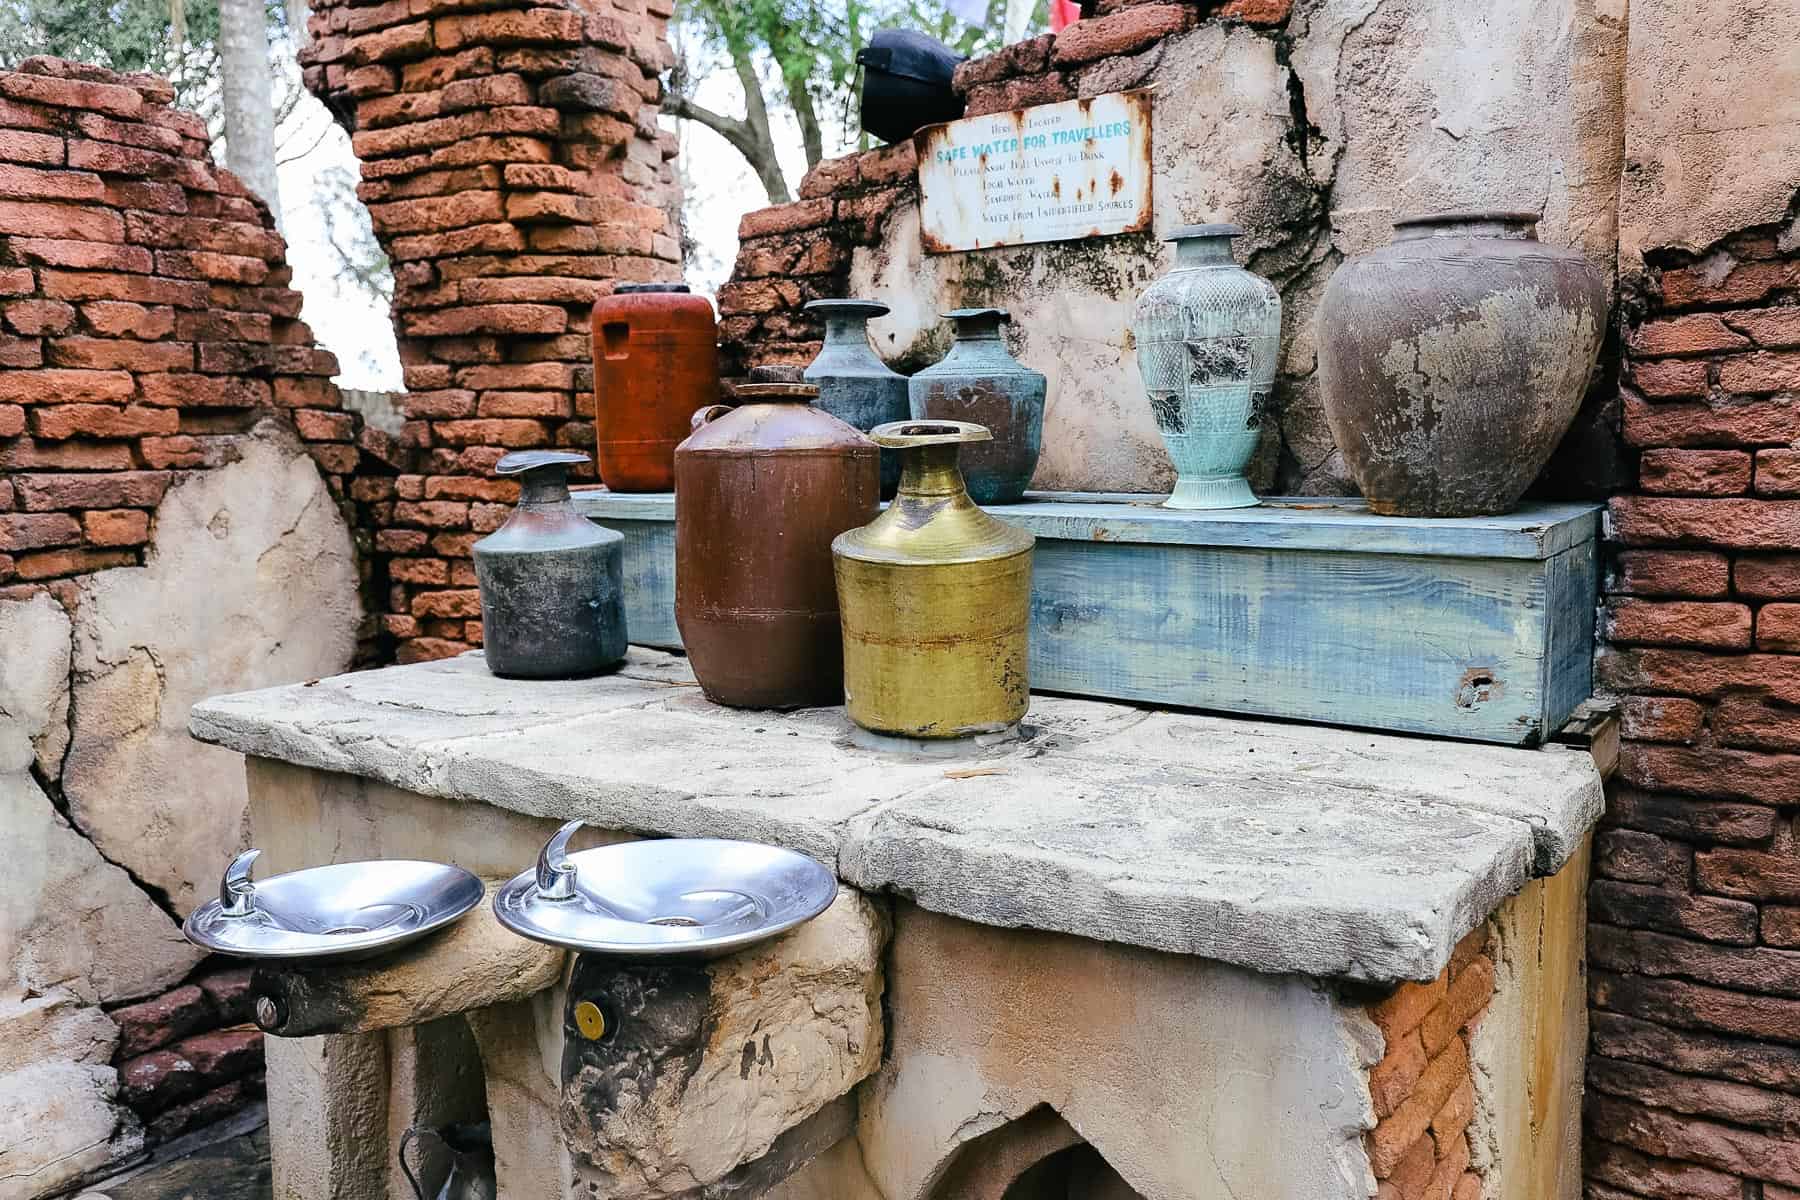 water fountains along the trek with jars and clay pots 